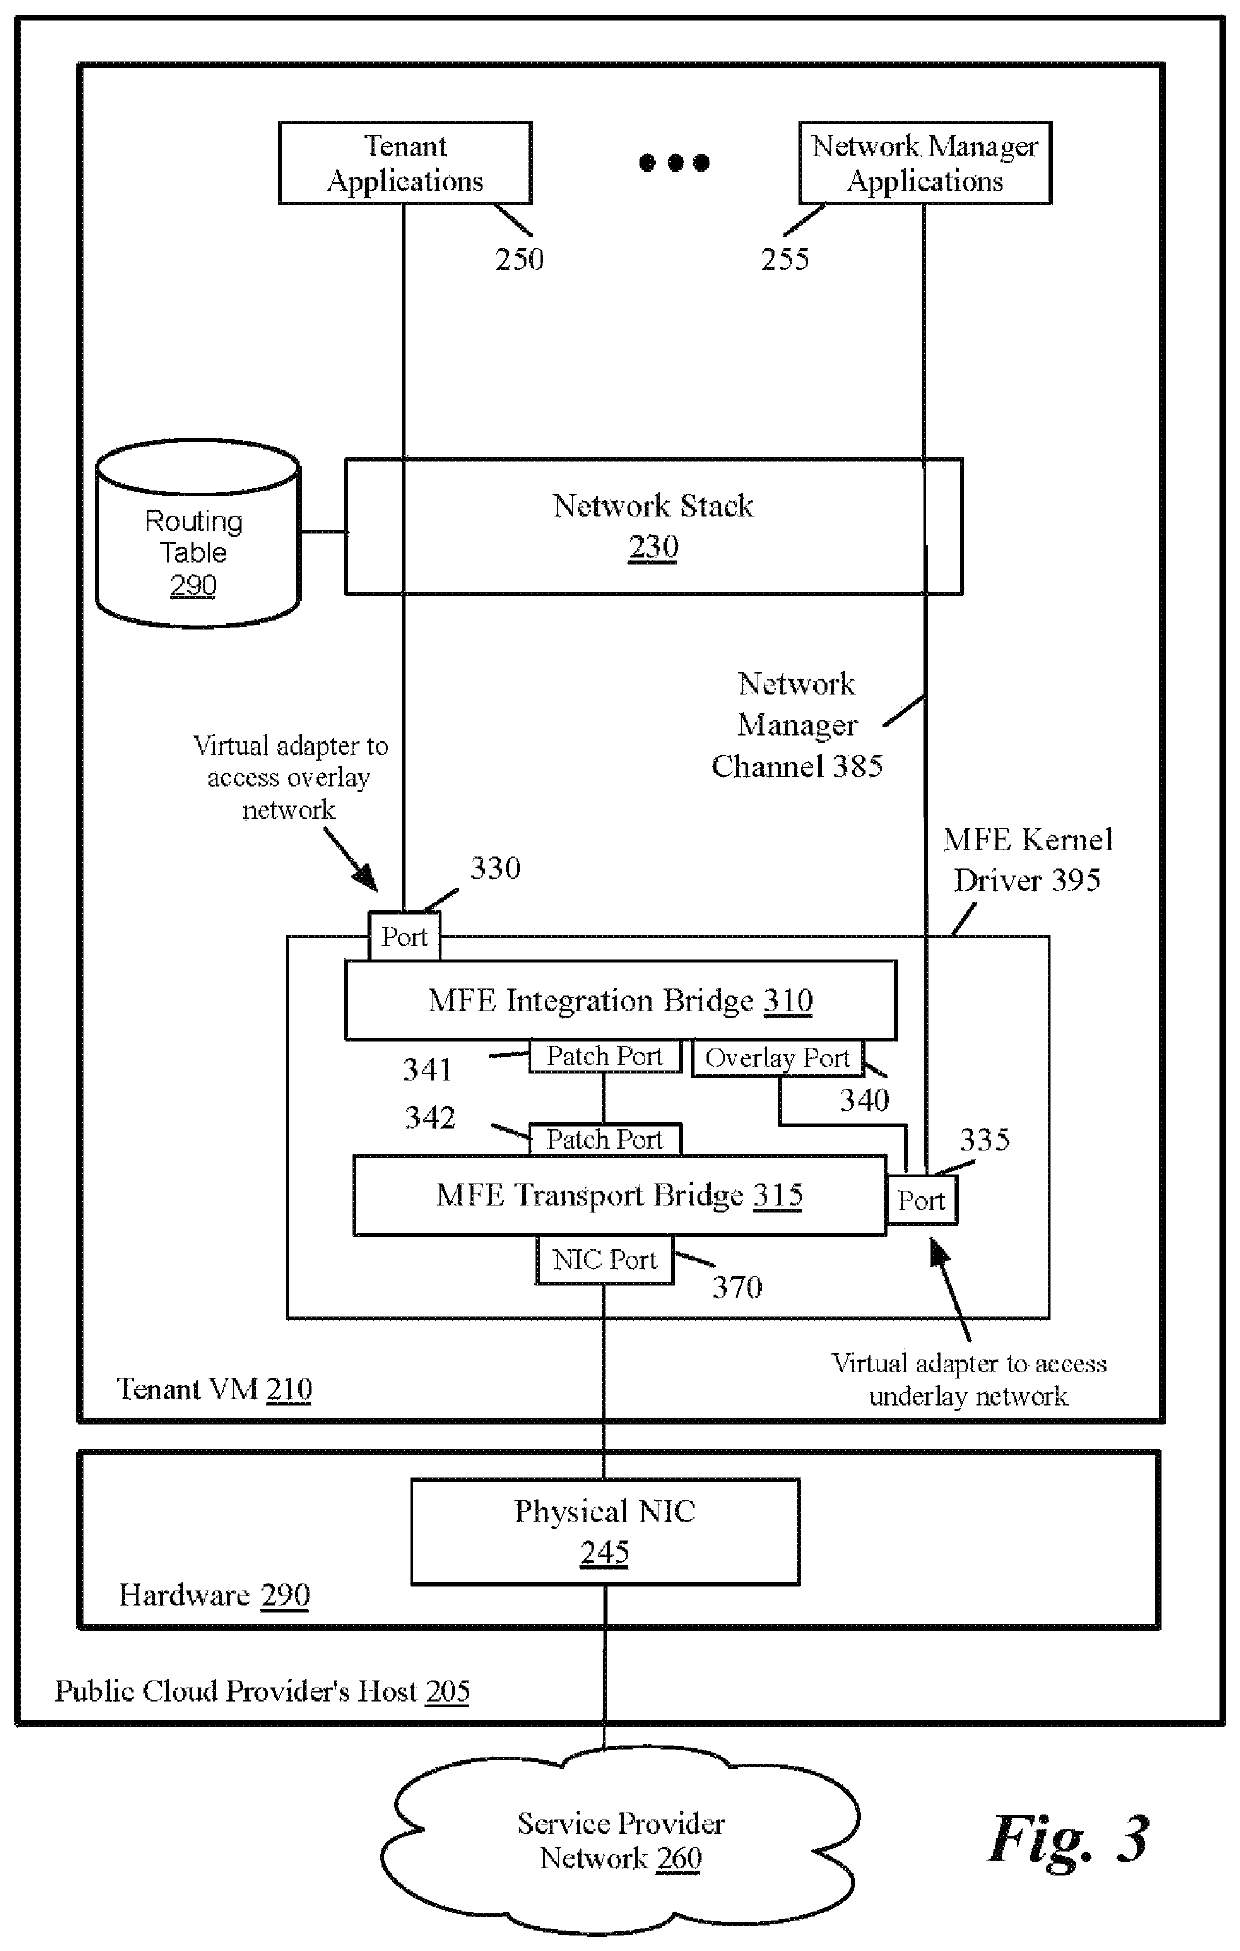 Packet communication between logical networks and public cloud service providers native networks using a single network interface and a single routing table